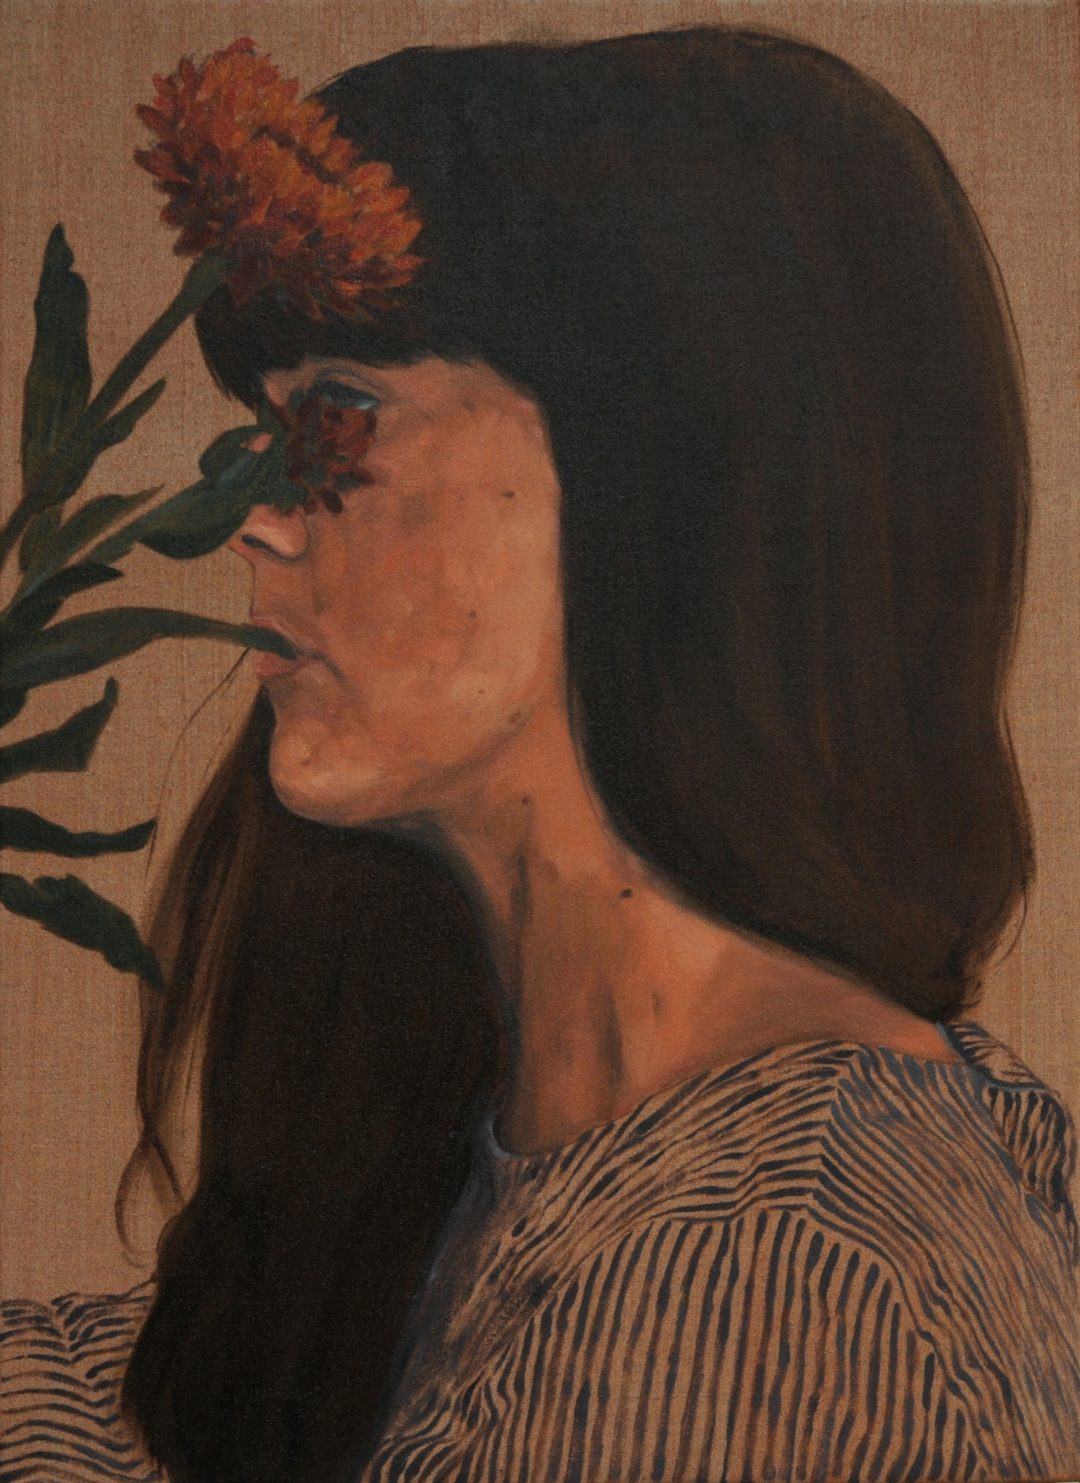 Louise Tate, Self-portrait with strawflower 2023
oil on linen
58 x 43 cm. Courtesy the artist and Jan Murphy Gallery.
Winner of the 2023 Bayside Acquisitive Art Prize
